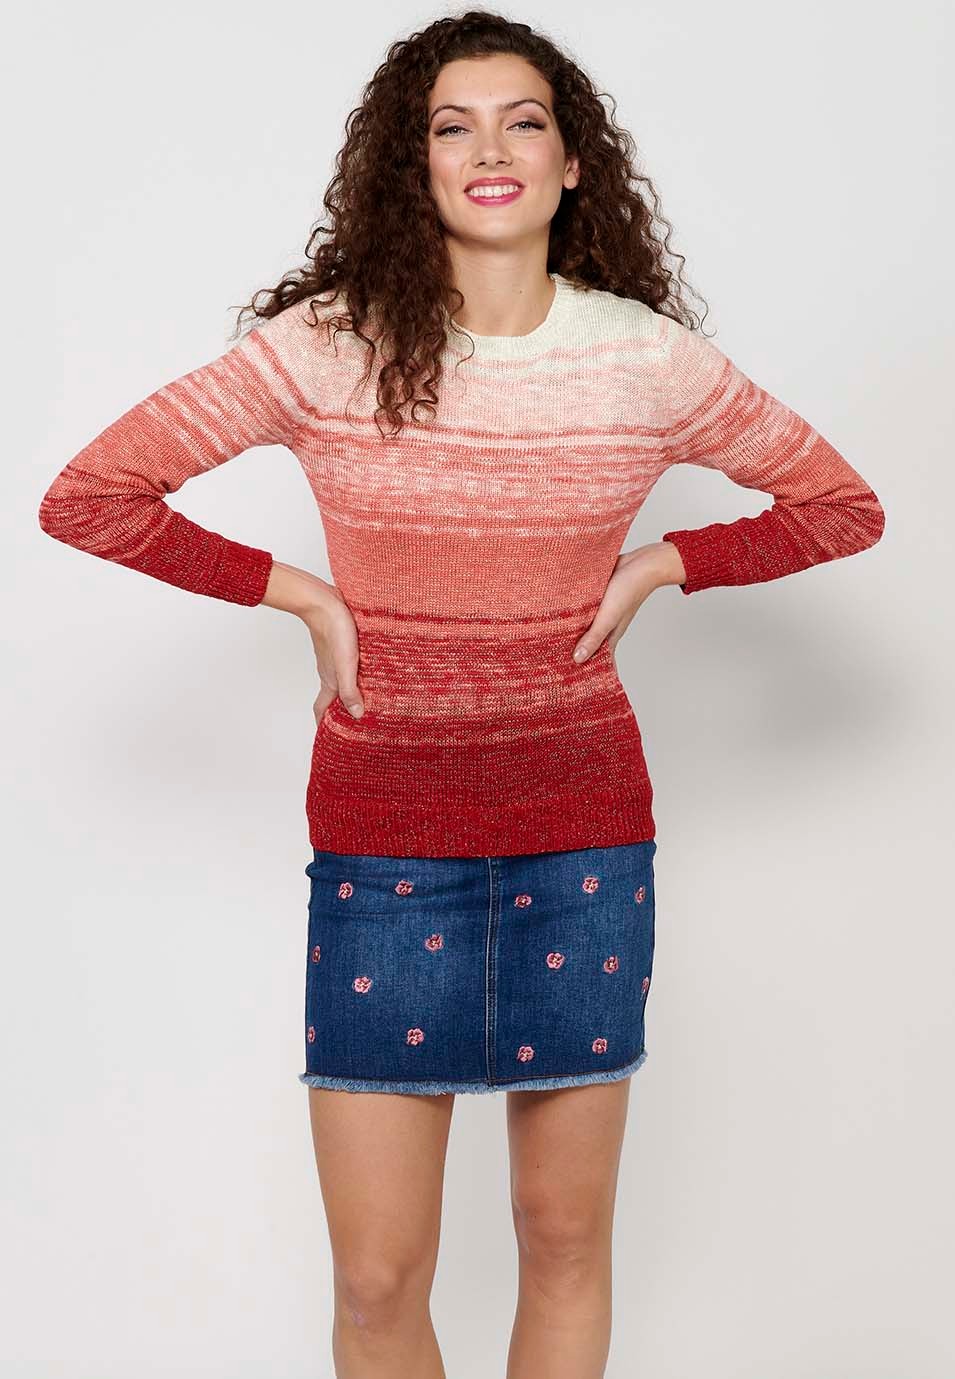 Round neck long sleeve sweater. Gradient Tricot in two colors of Coral Color for Women